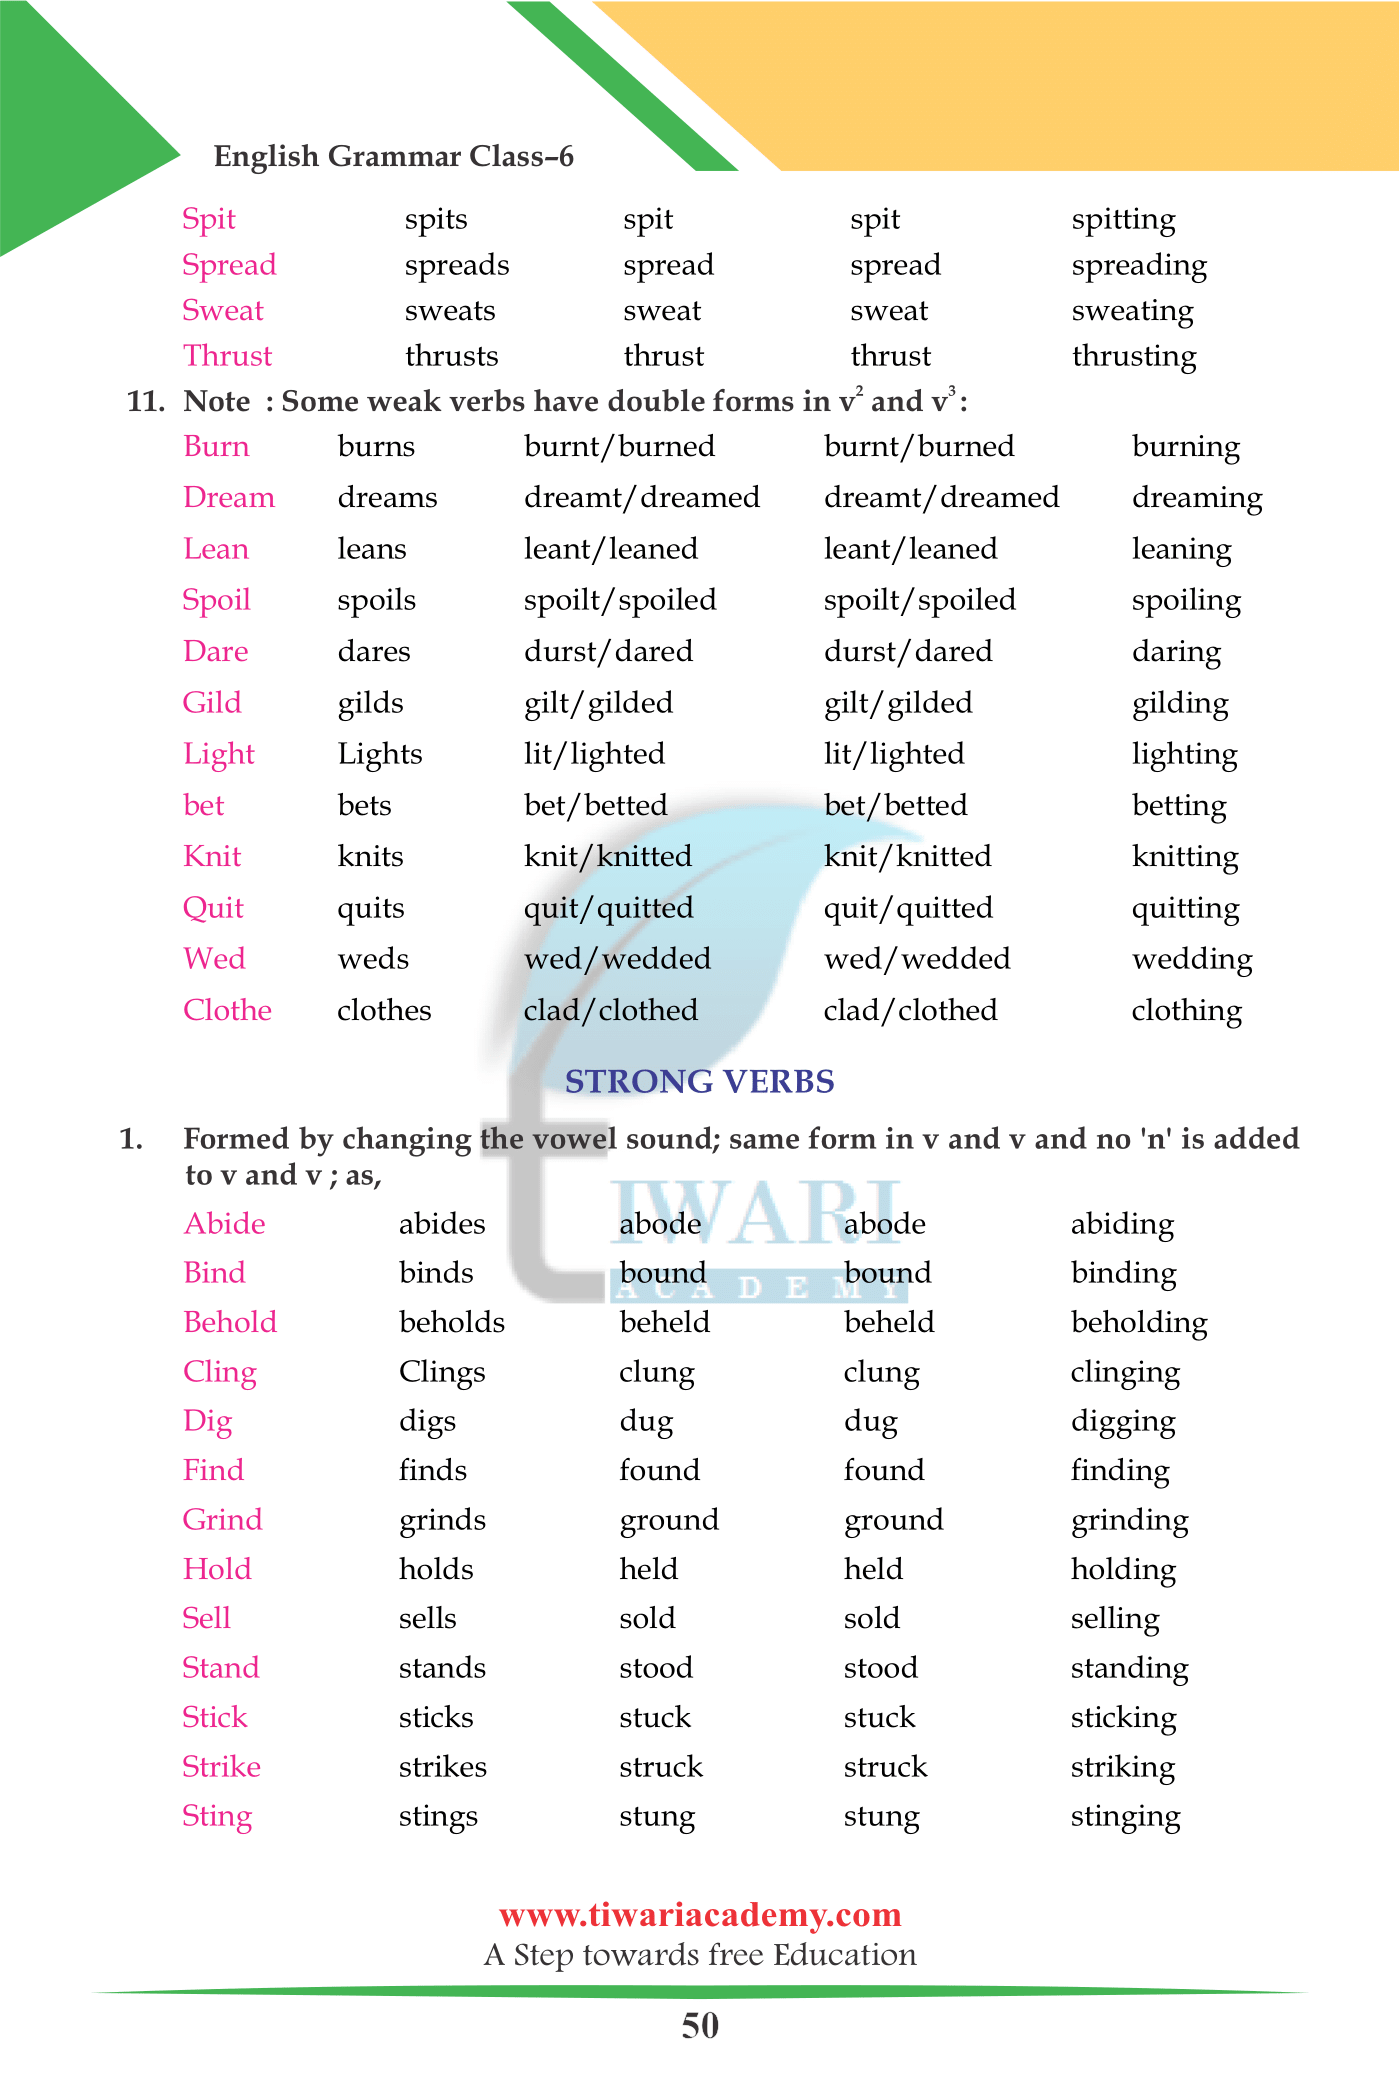 Verb Forms for Class 6 English